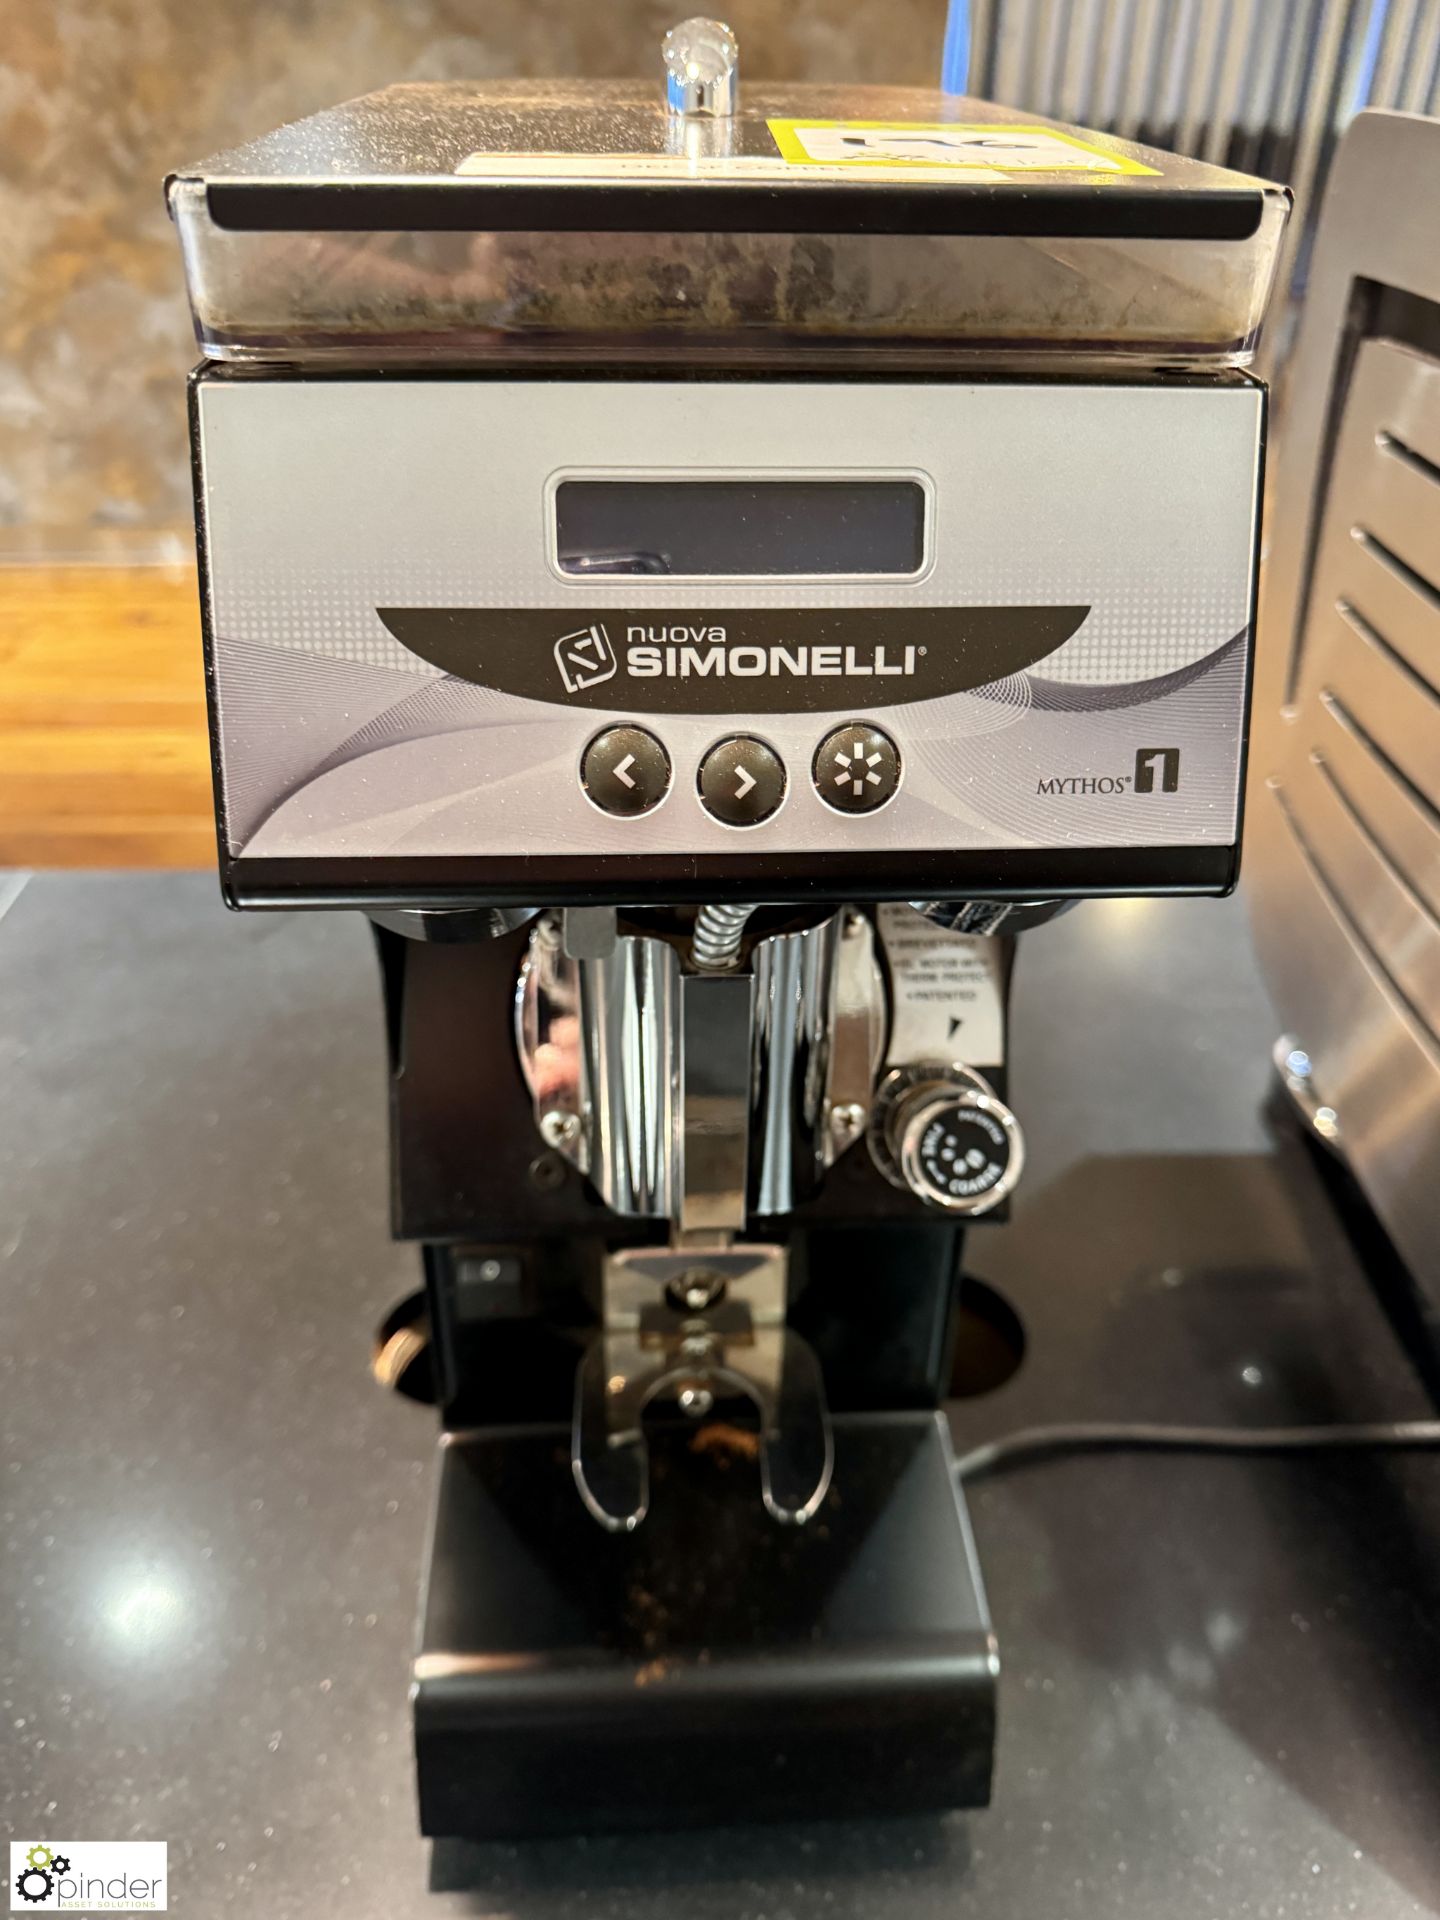 Nuova Simonelli Mythos 1 Coffee Grinder, 240volts (location in building - level 22 coffee shop) - Image 2 of 7